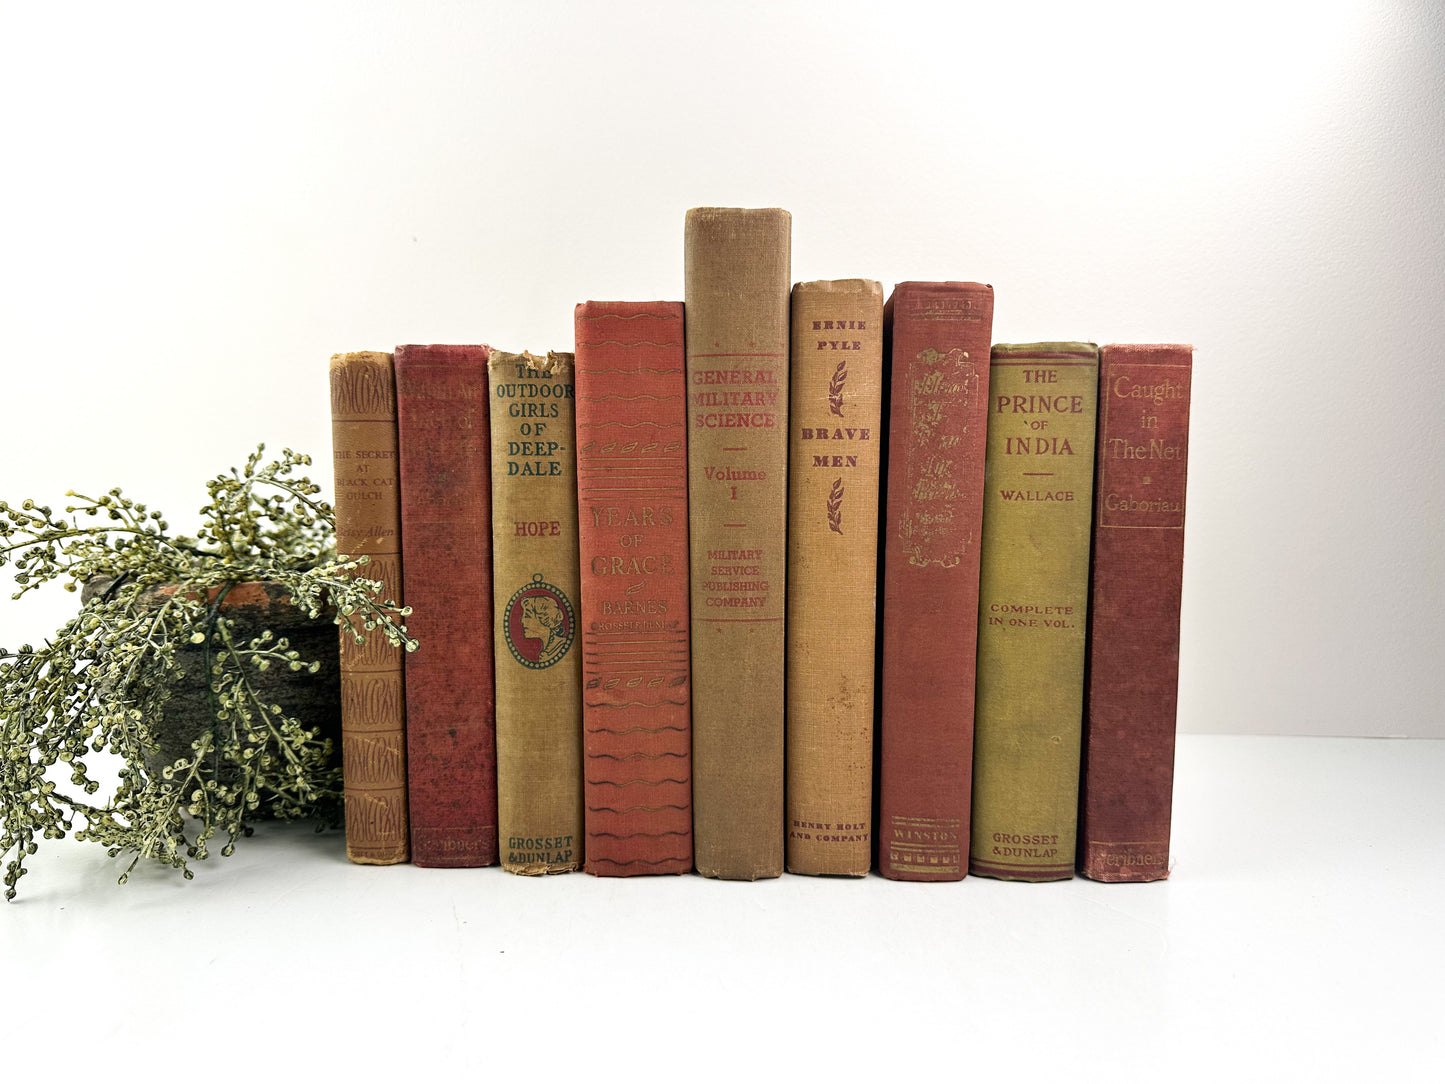 Red and Brown Book Decor